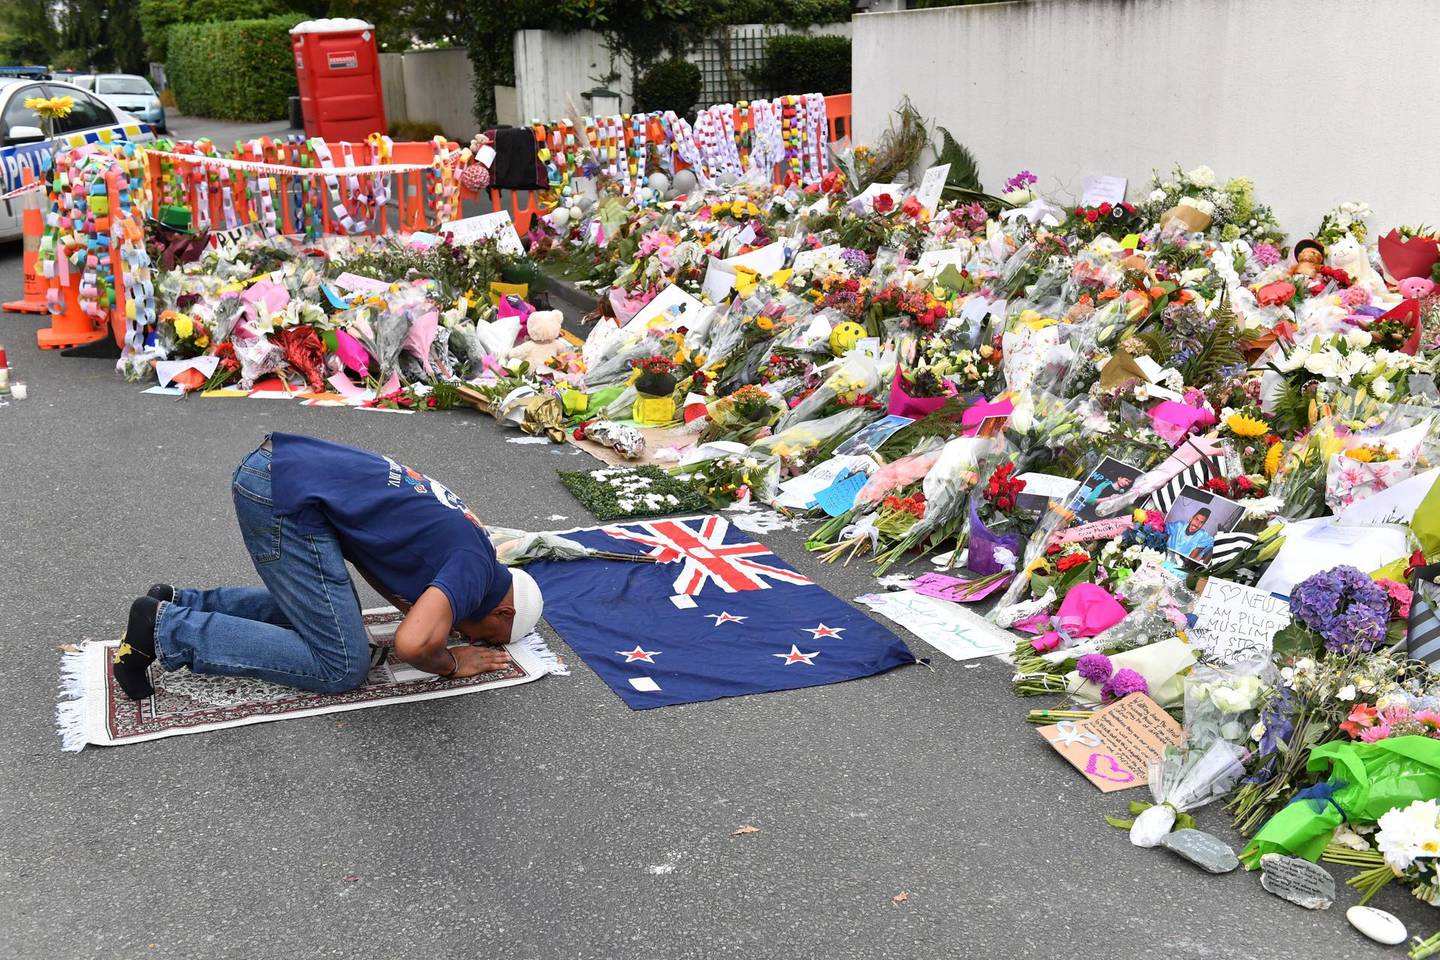 epa07447506 A muslim worshipper prays at a makeshift memorial near the Al Noor Mosque on Deans Rd in Christchurch, New Zealand, 19 March 2019. A gunman killed 50 worshippers and injured 50 more at the Al Noor Masjid and Linwood Masjid on 15 March, 28-year-old Australian man, Brenton Tarrant, has appeared in court on 16 March and charged with murder.  EPA/MICK TSIKAS  AUSTRALIA AND NEW ZEALAND OUT